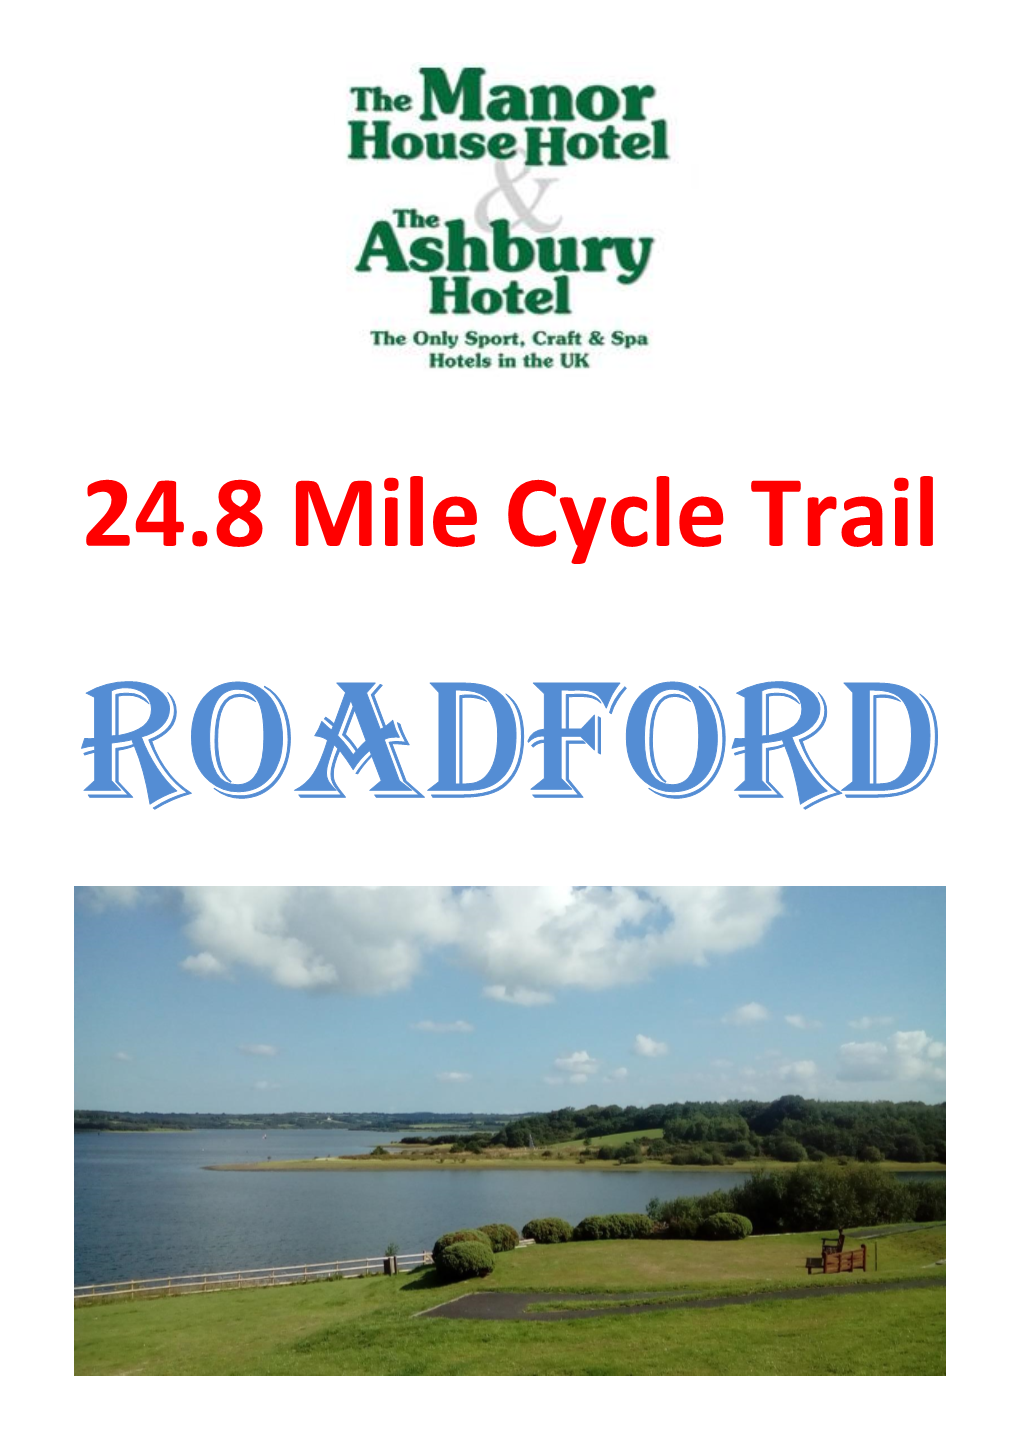 24.8 Mile Cycle Trail ROADFORD